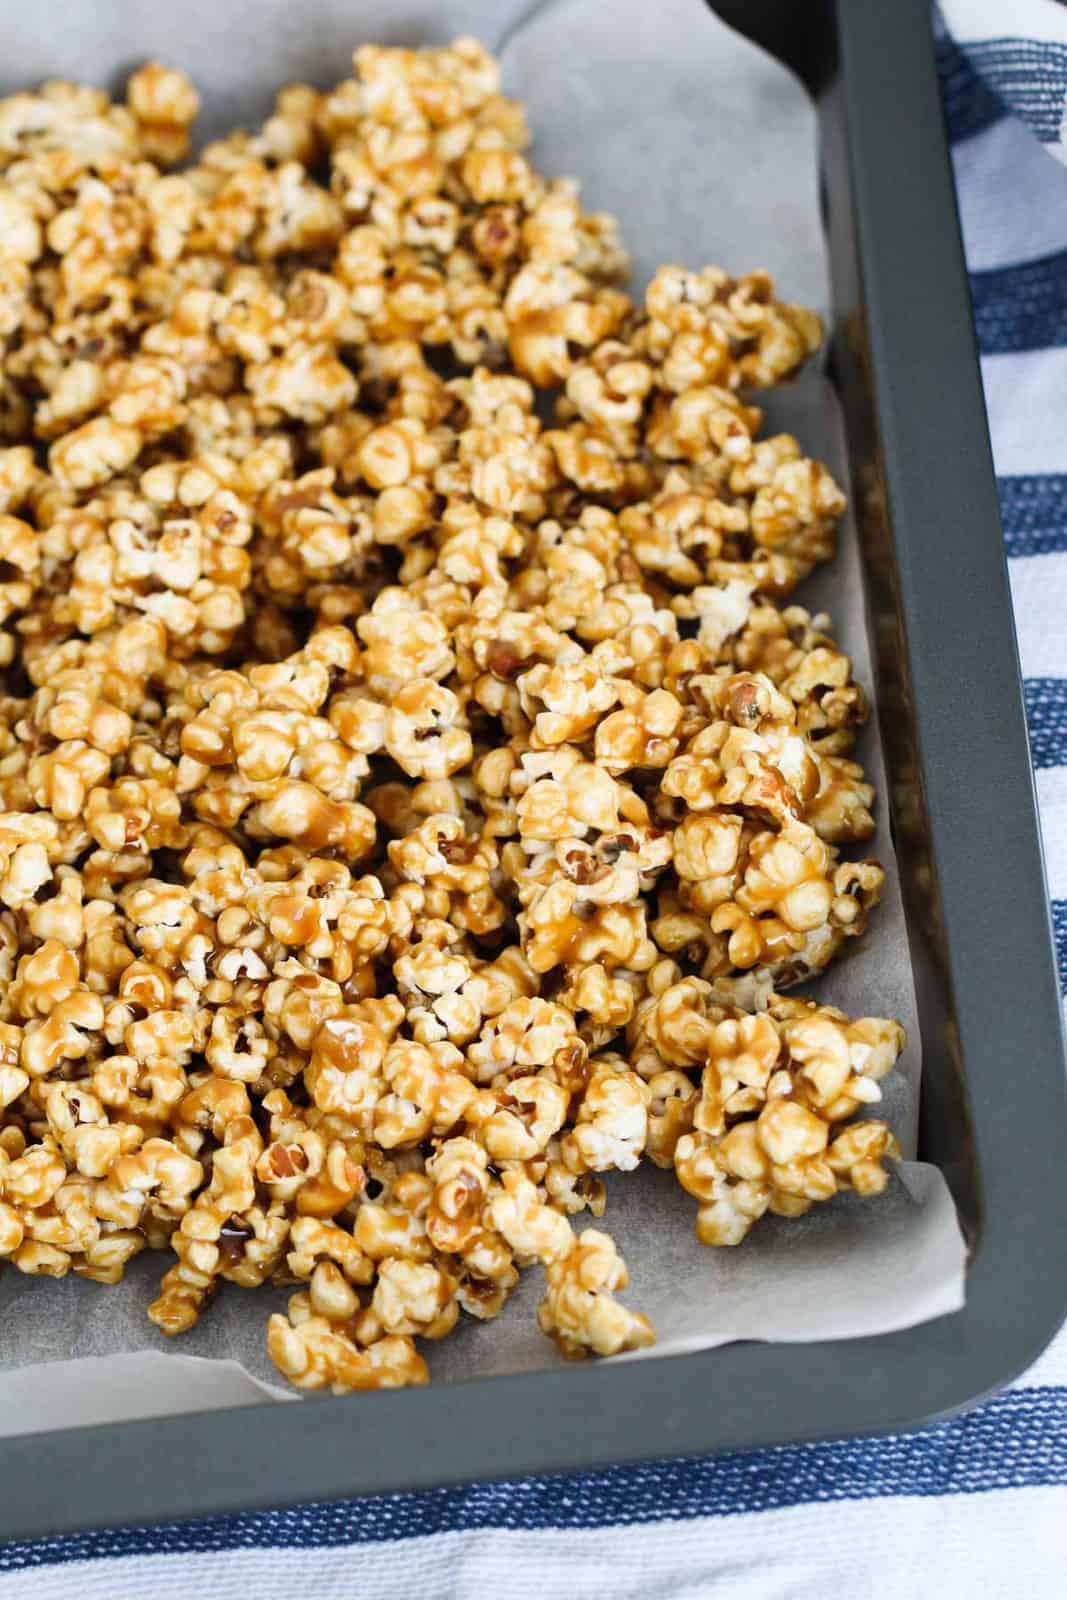 Salted caramel popcorn on a tray lined with baking paper